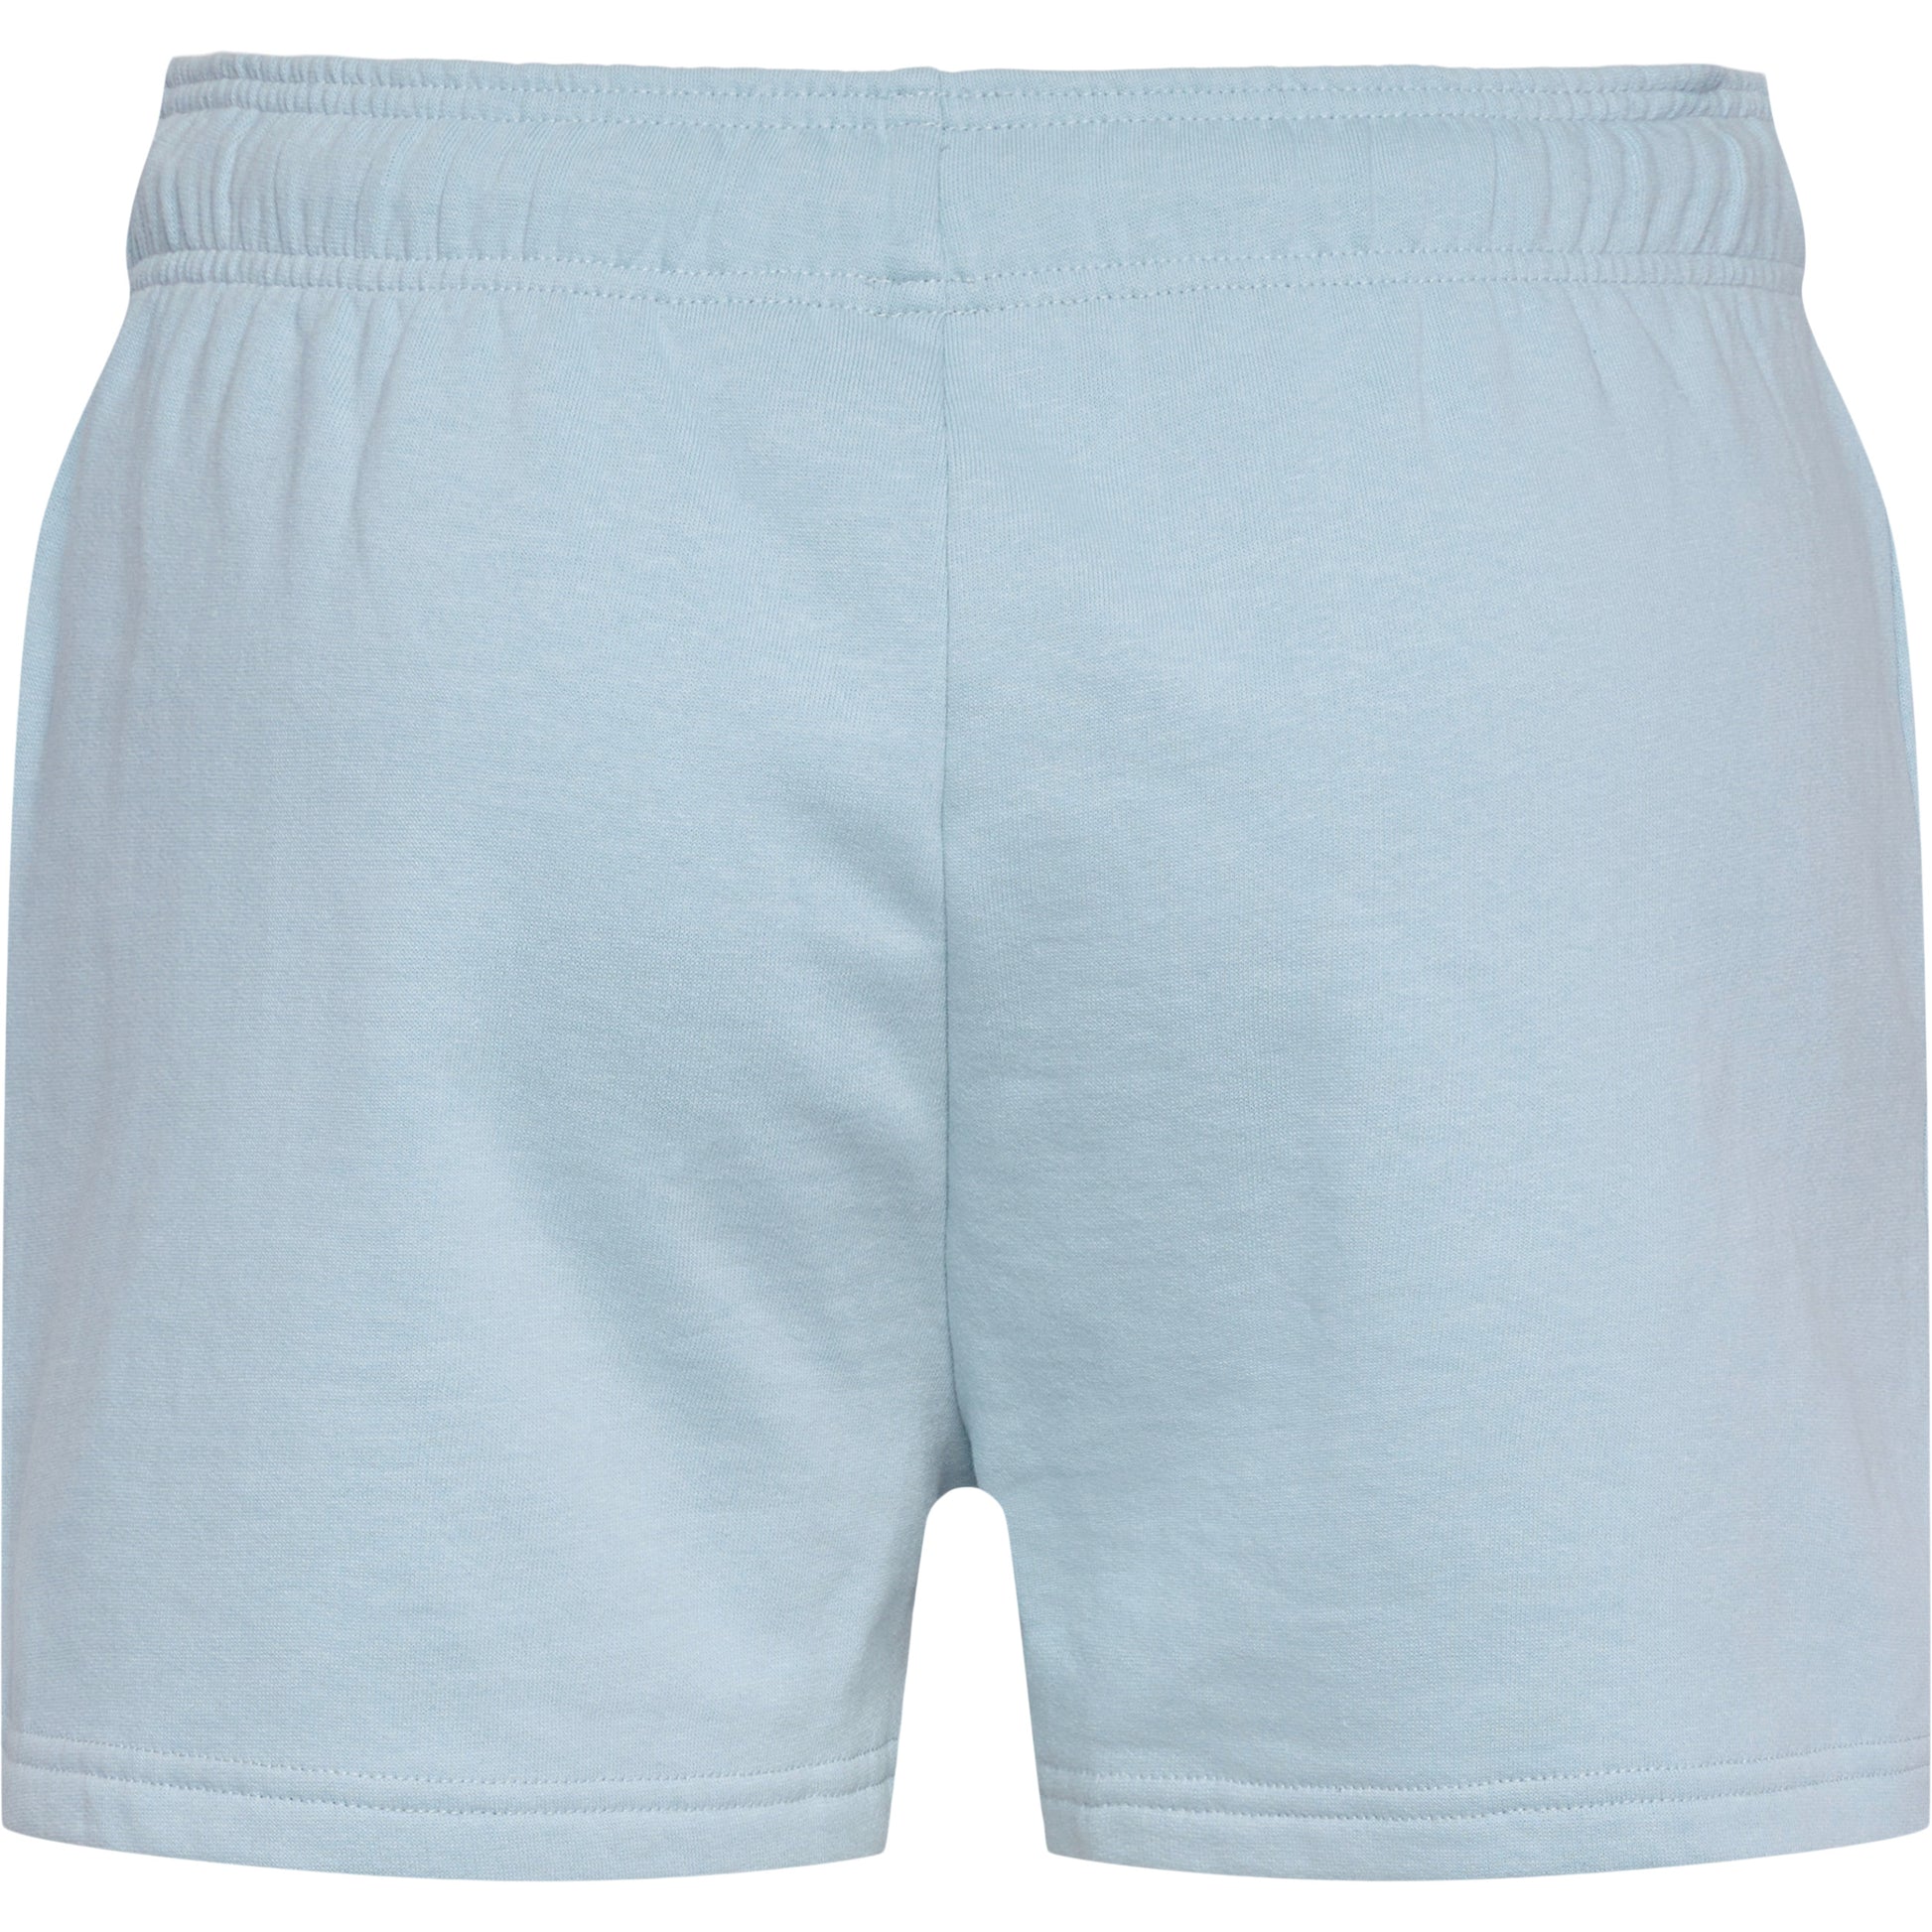 hmllegacy woman shorts